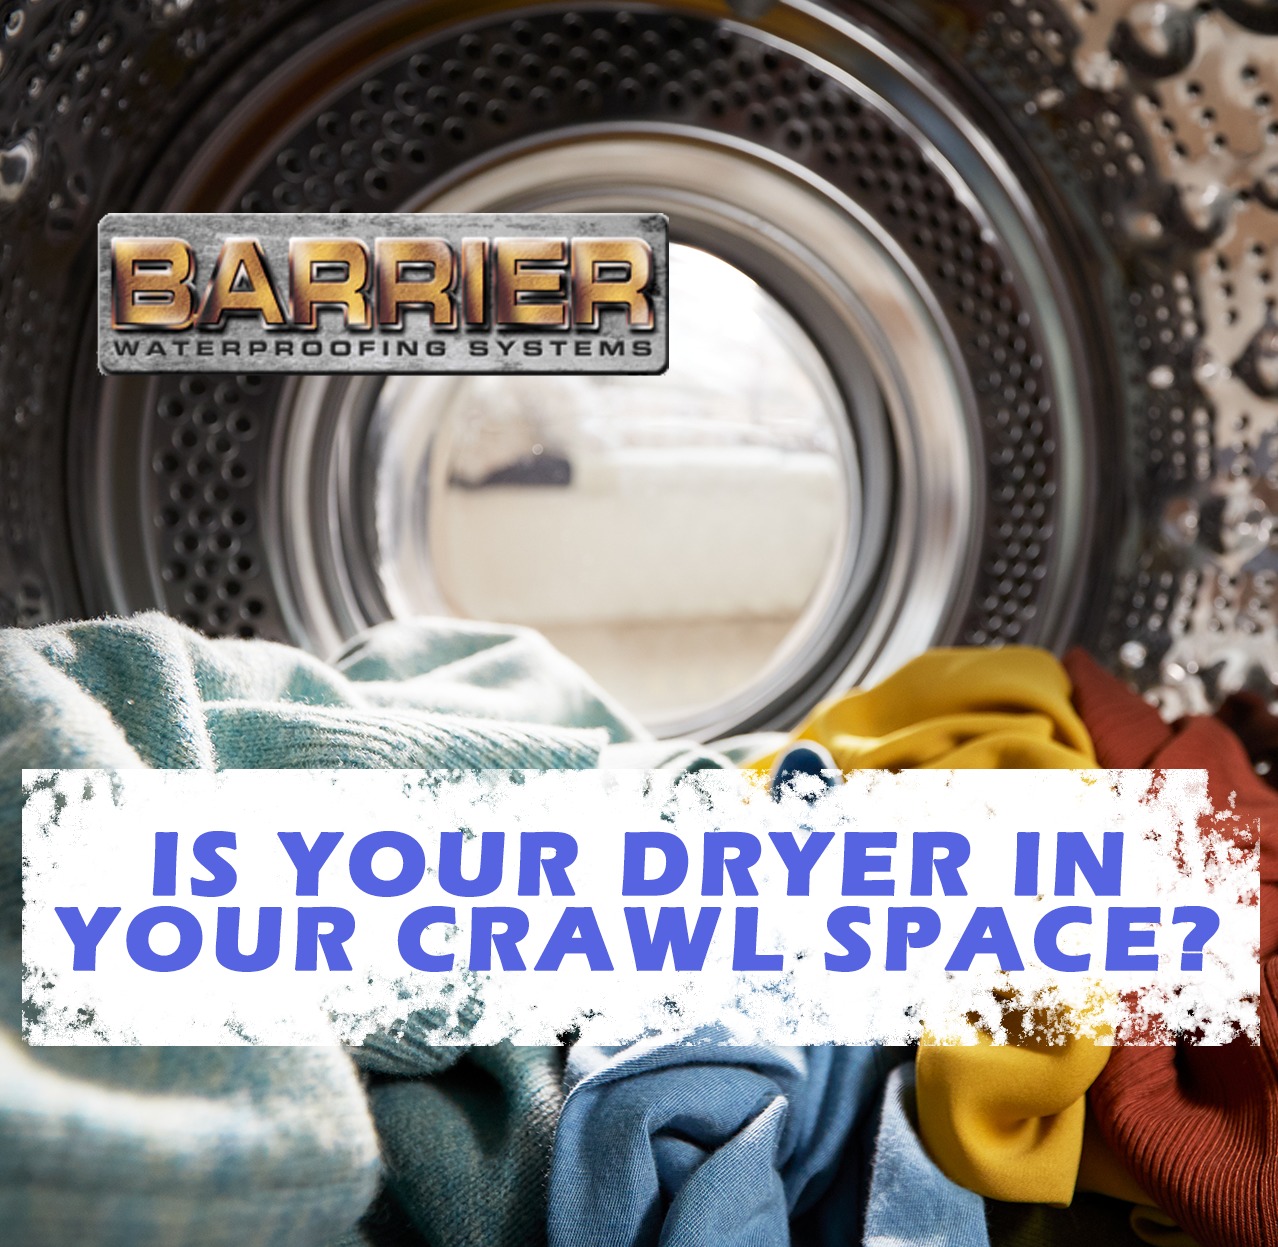 Barrel of a dryer in your crawl space filled with clothes